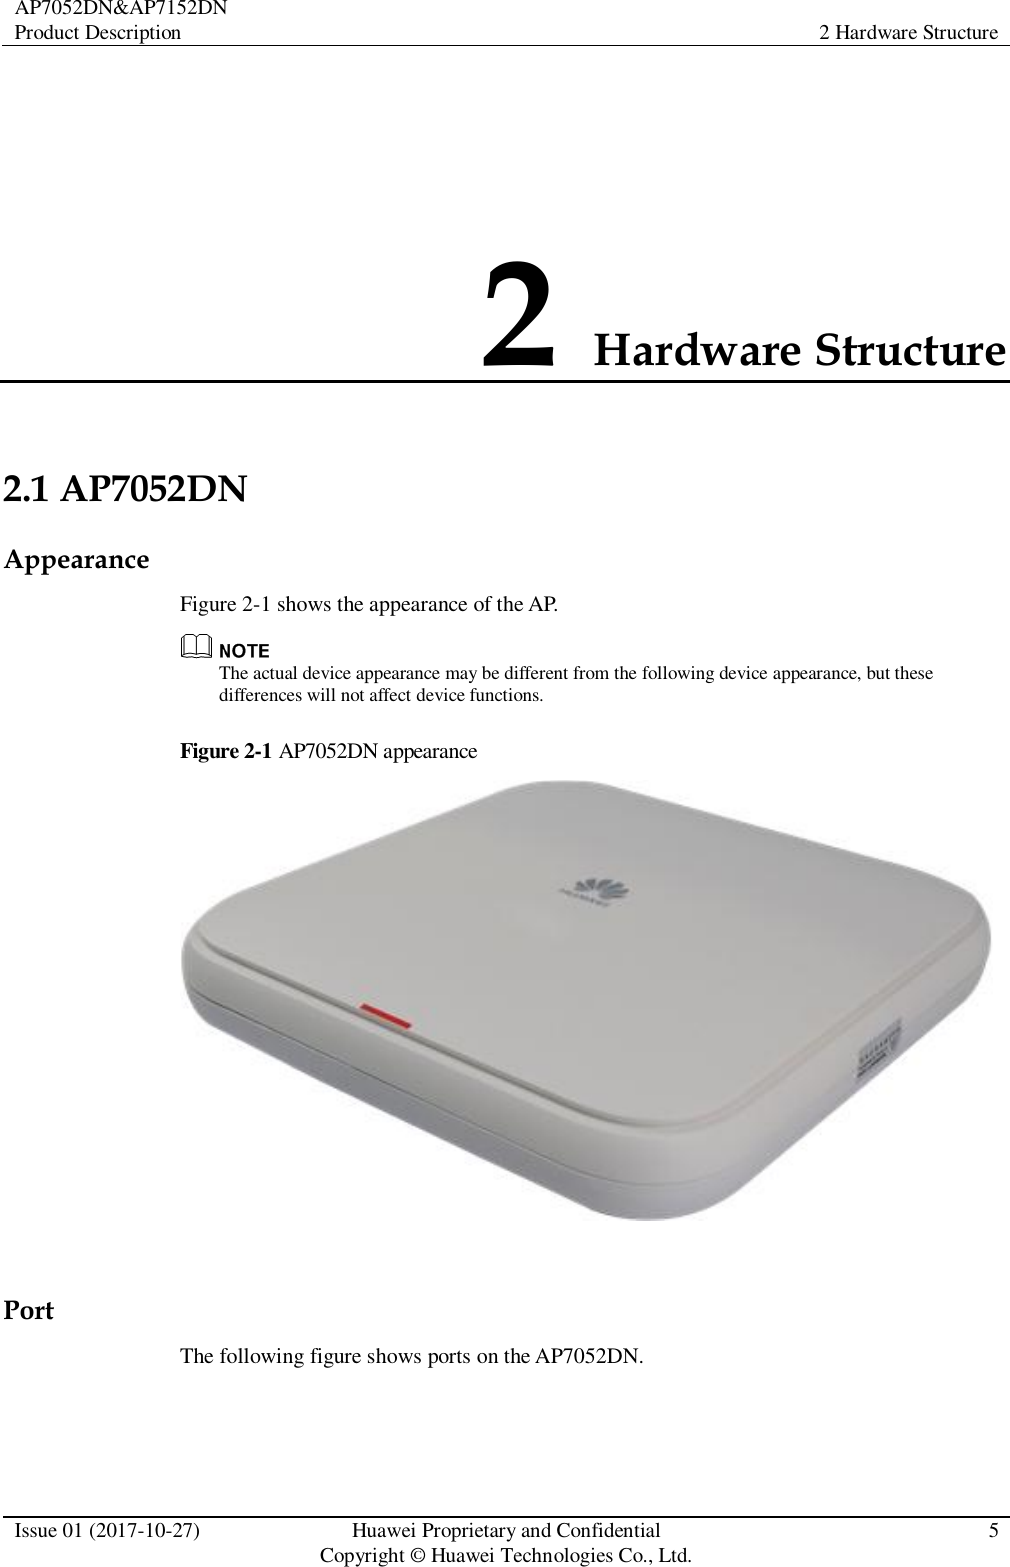 AP7052DN&amp;AP7152DN Product Description 2 Hardware Structure  Issue 01 (2017-10-27) Huawei Proprietary and Confidential                                     Copyright © Huawei Technologies Co., Ltd. 5  2 Hardware Structure 2.1 AP7052DN Appearance Figure 2-1 shows the appearance of the AP.  The actual device appearance may be different from the following device appearance, but these differences will not affect device functions. Figure 2-1 AP7052DN appearance   Port The following figure shows ports on the AP7052DN. 